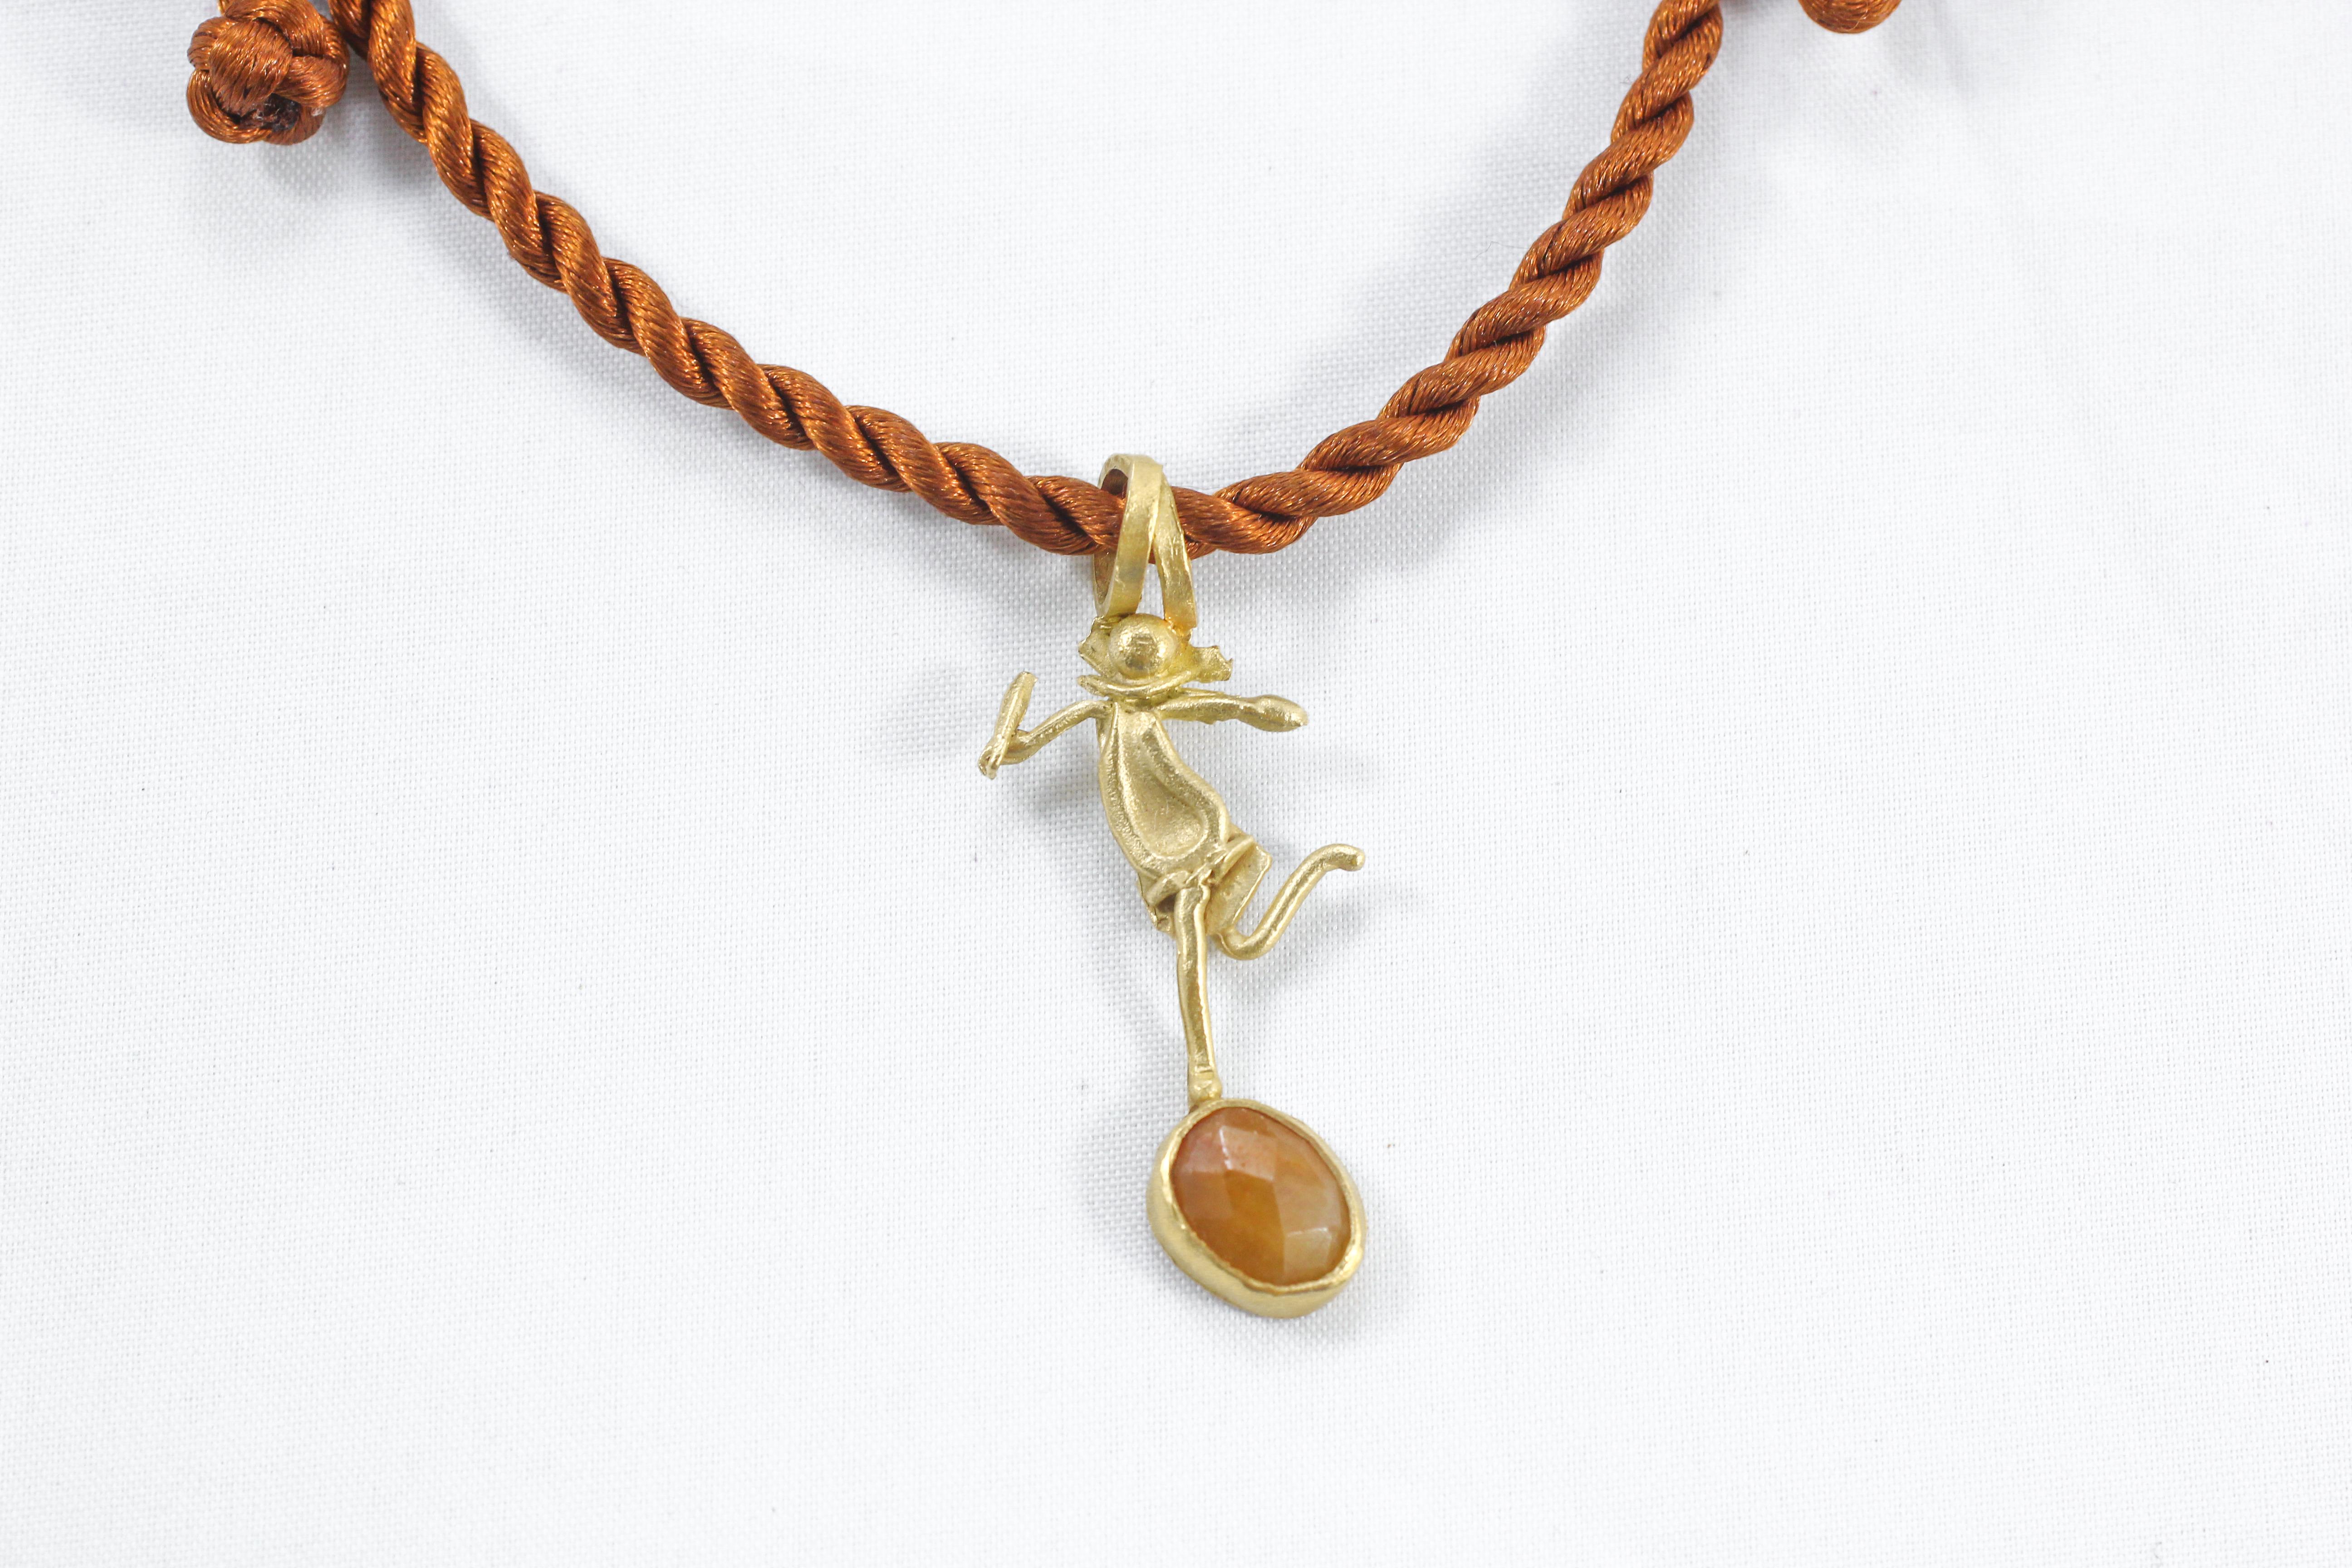 DANCE, She pendant drop necklace on silk cord/rope (included in the price). 18K gold dancing figure with a rose-cut sapphire set in a bezel. Also, pictured together with He pendant and on a leather multi-strand necklace (all sold separately).